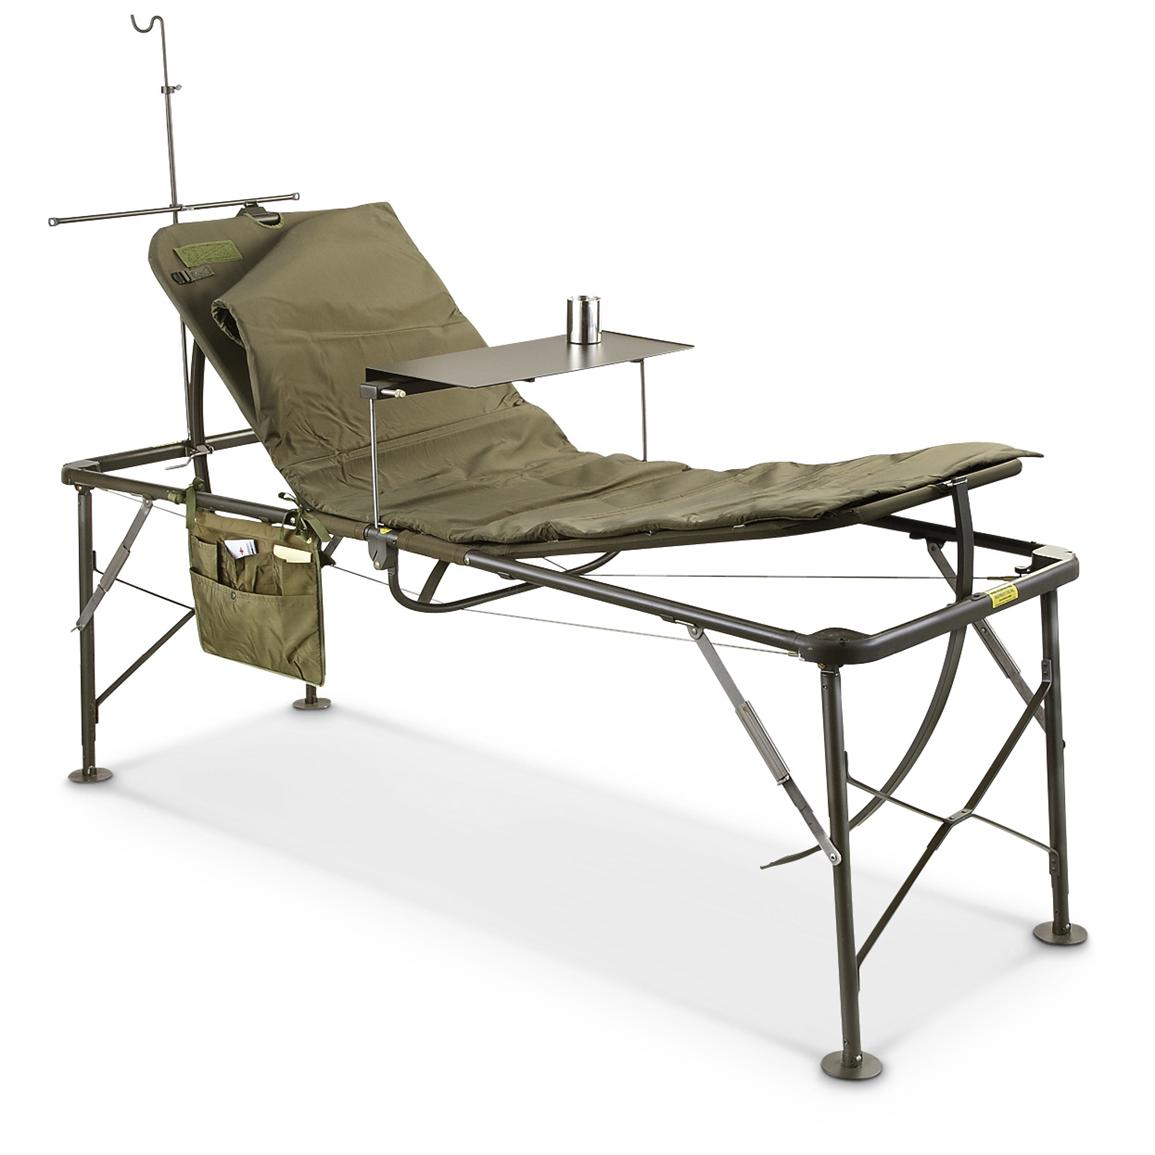 U.S. Military Surplus Foldable Field Hospital Bed/Cot, New 578939